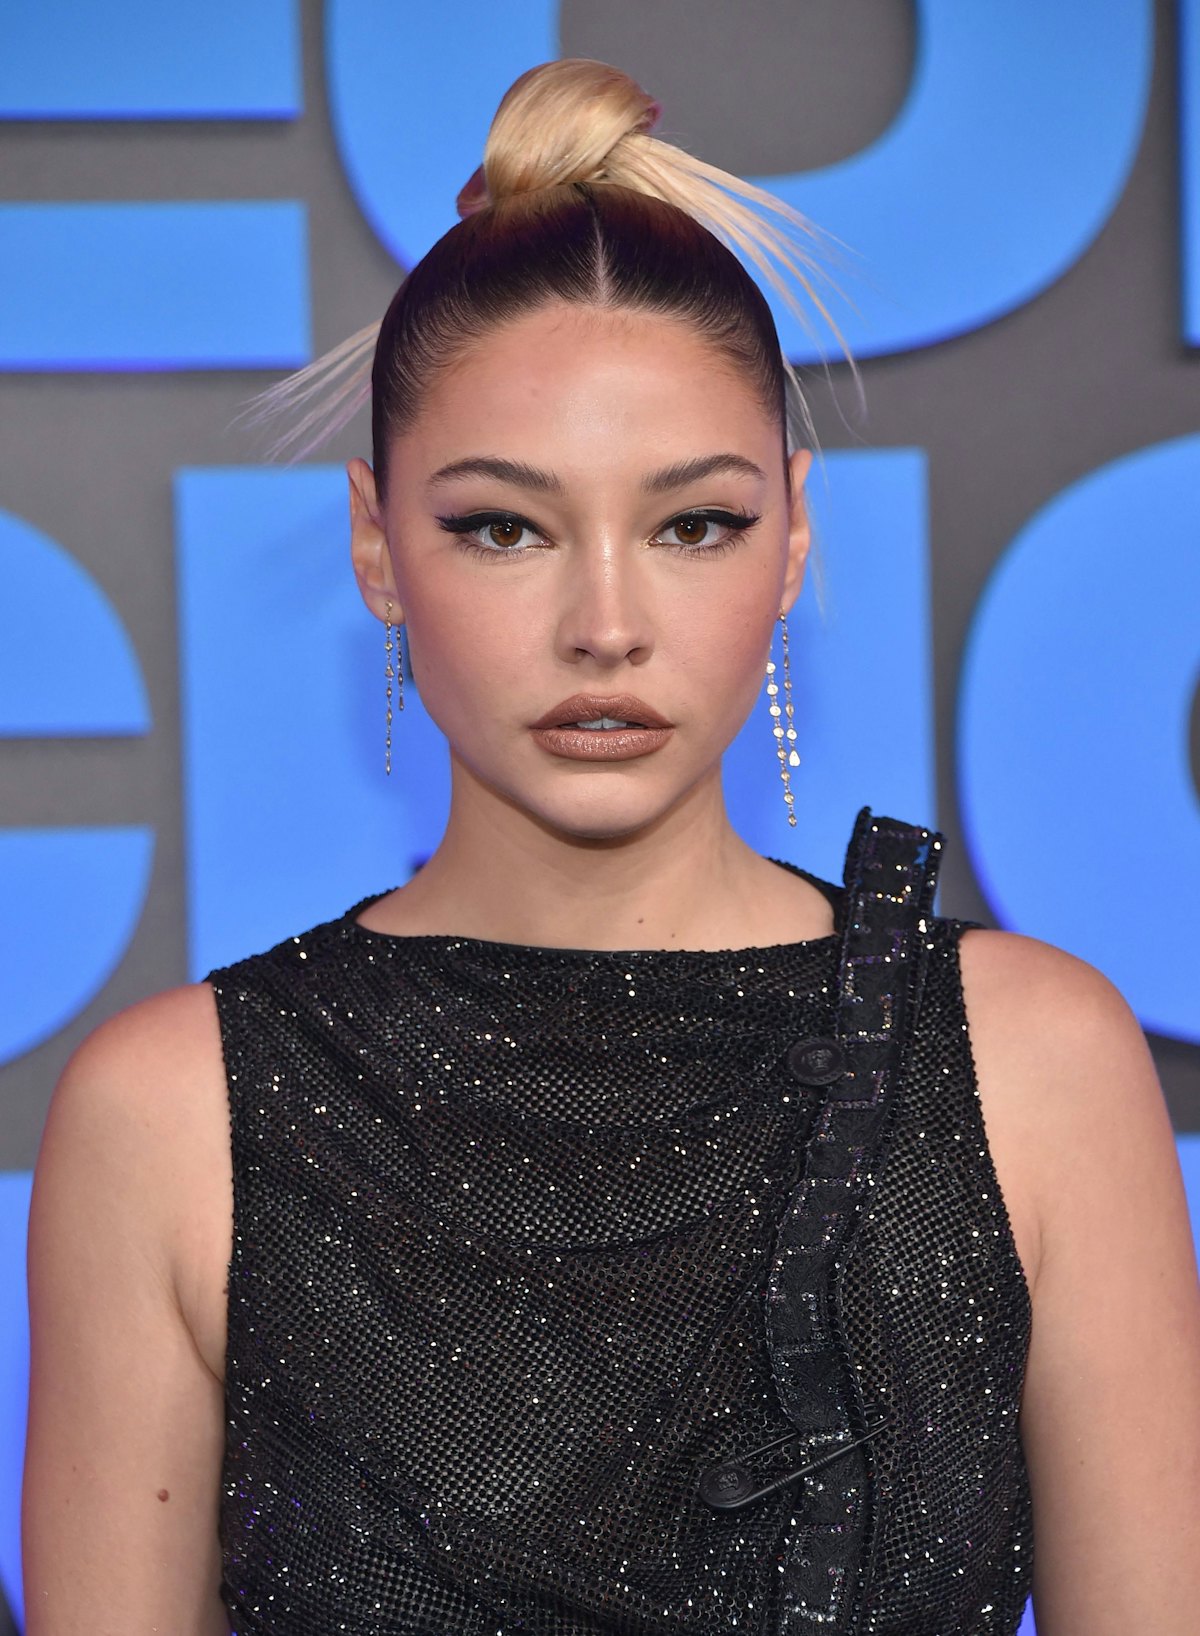 One of the best beauty looks at the People's Choice Awards 2021: Madelyn Cline's graphic black eyeli...